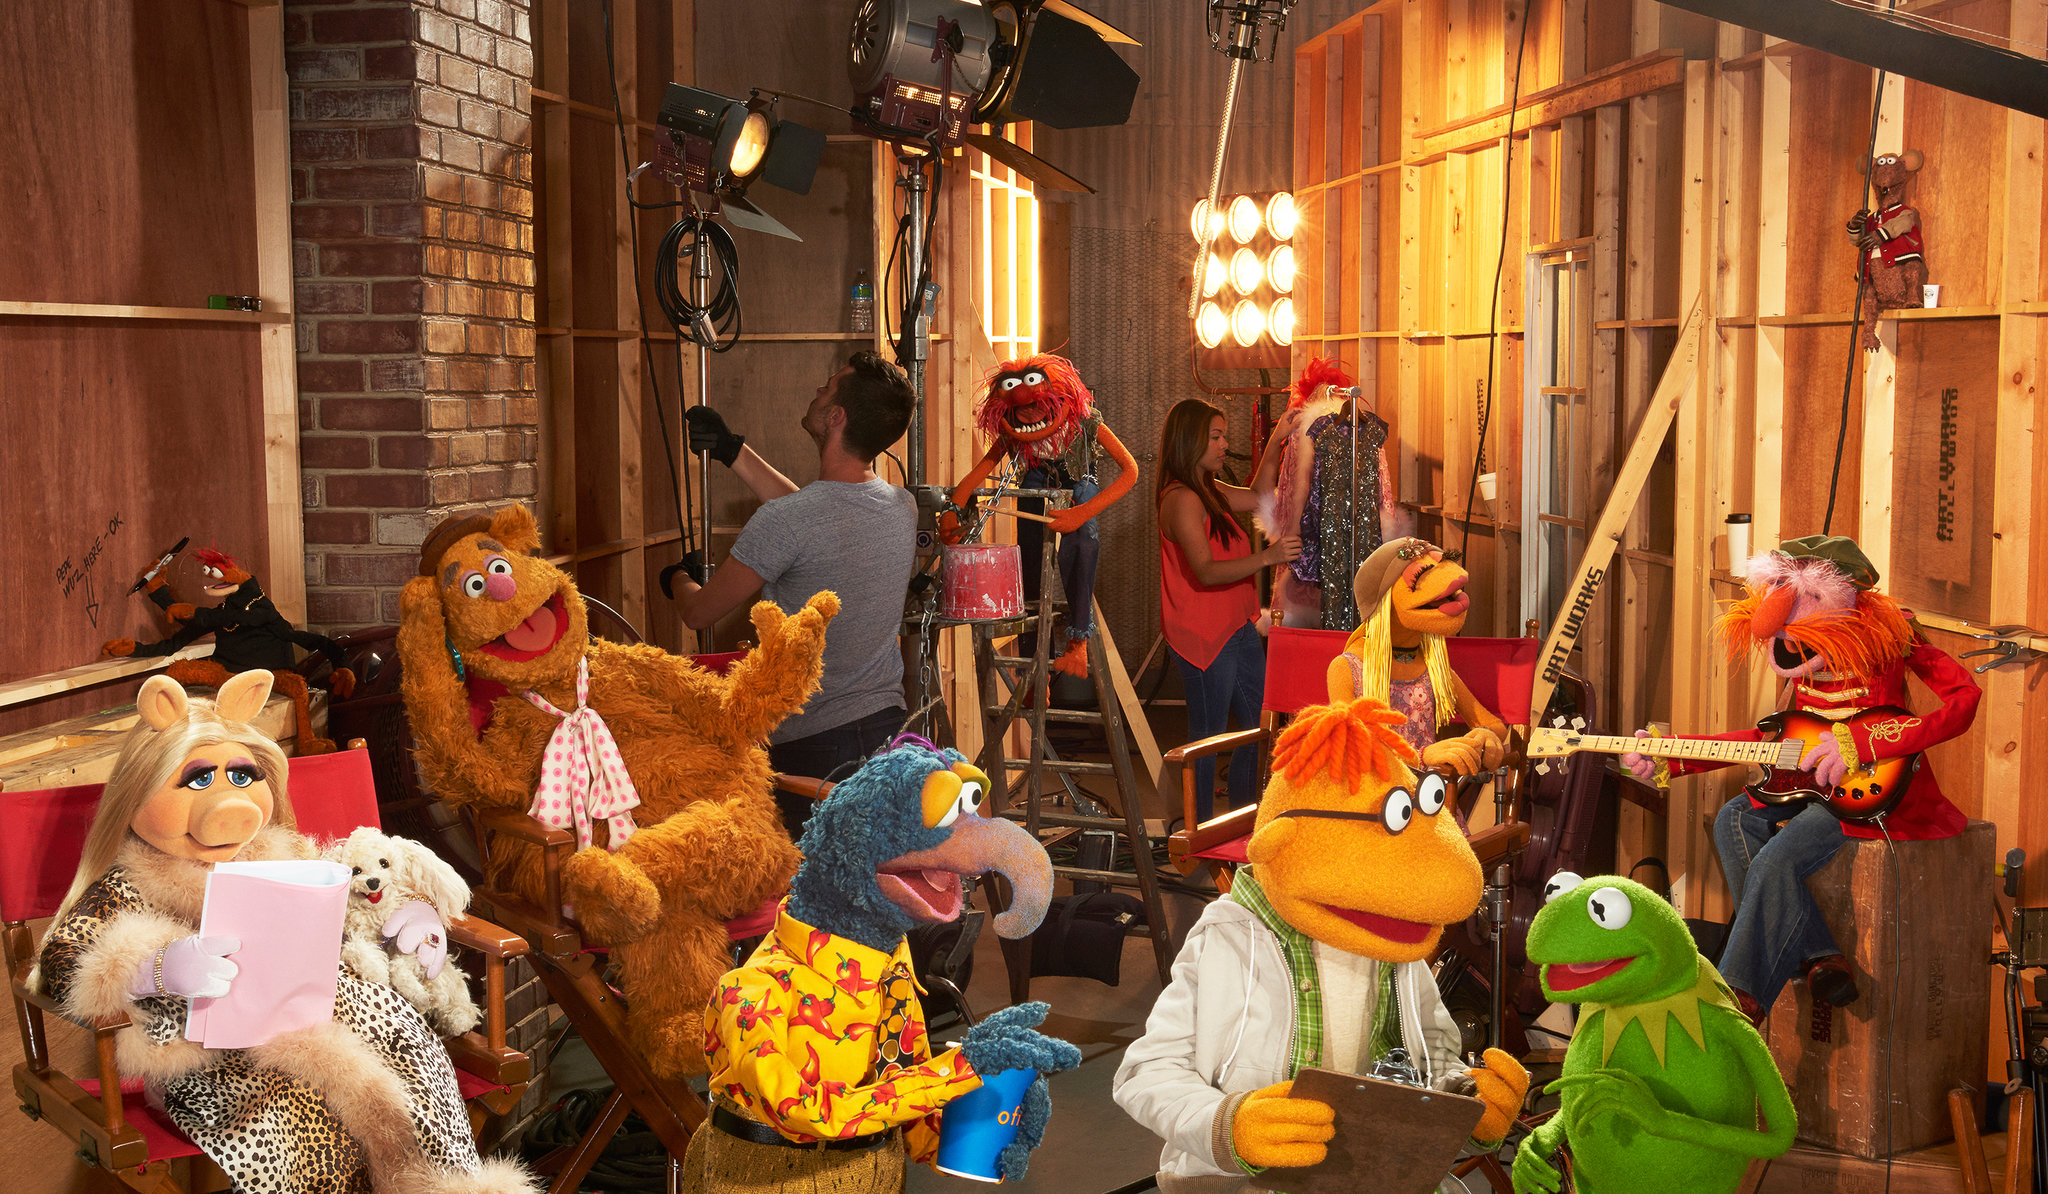 Review of The Muppets